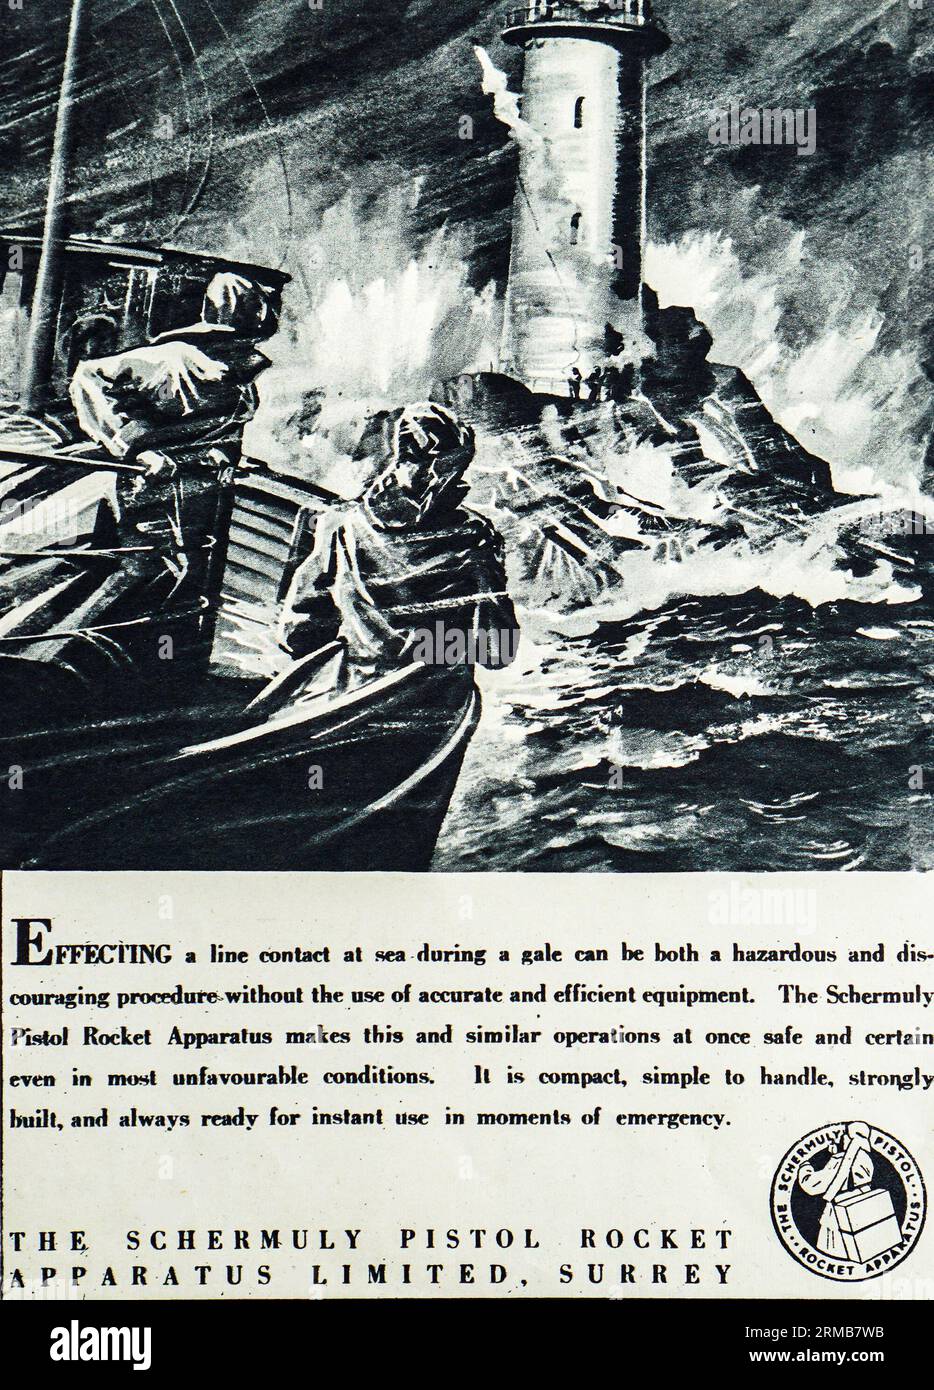 A 1942 wartime advertisement for The Schermuly Pistol Rocket Apparatus Limited of Surrey. Developed by William Schermuly in 1897, it was a ship line throwing appliance. In a 1929 Act of Parliament British registered ships over 500 tons were obliged to carry line throwing appliances. In the second world war this company employed over a thousand  people.  ‘Effecting a line contact at sea during a gale can be both a hazardous and discouraging experience without the use of accurate and efficient equipment’ Stock Photo